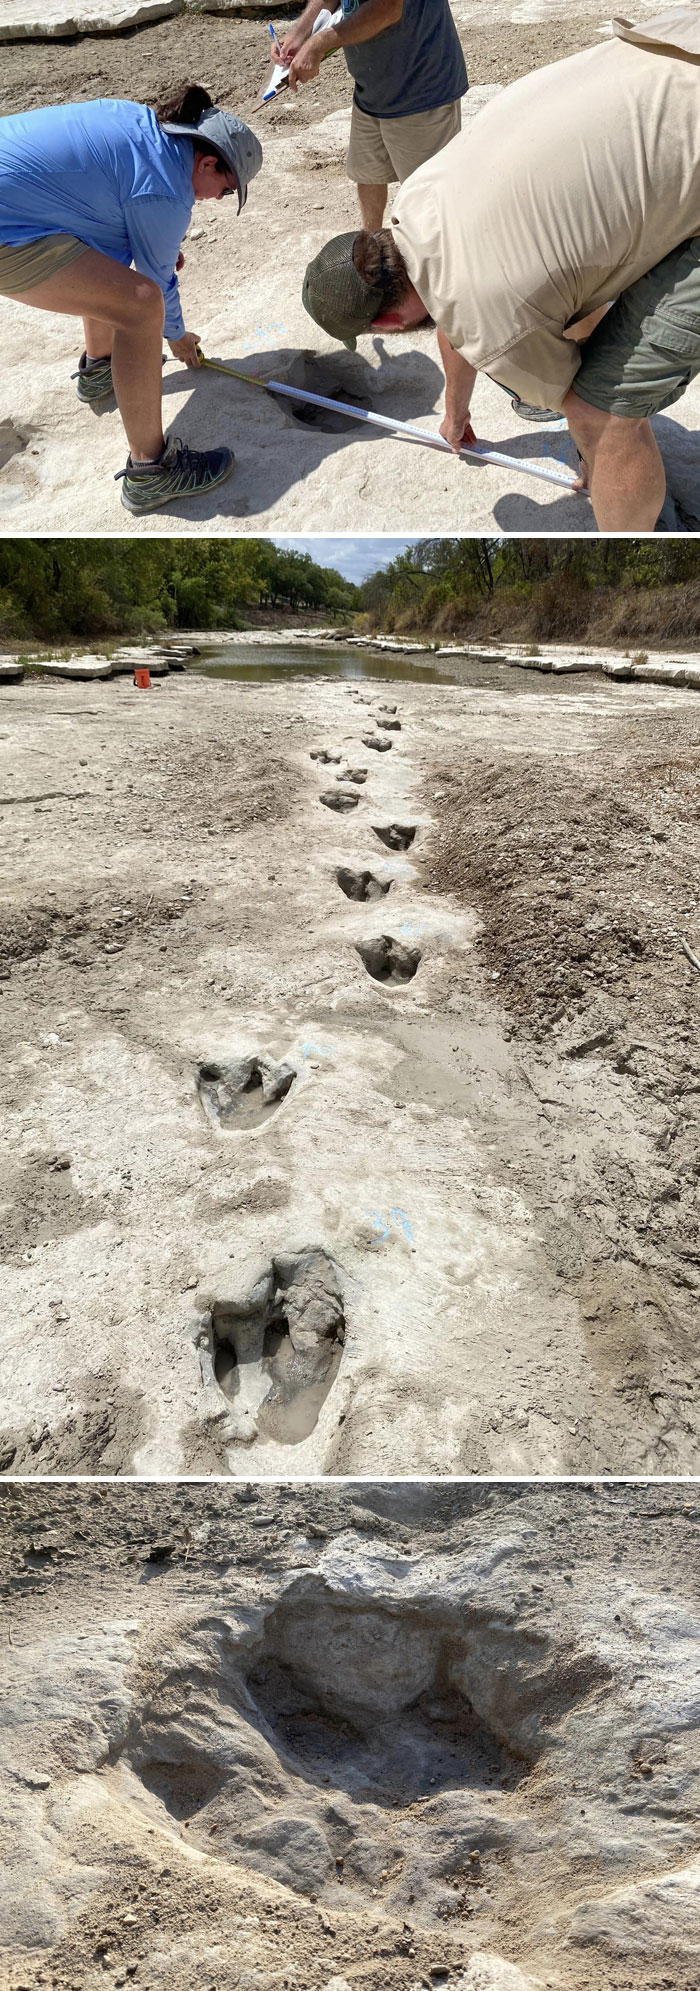 Amid A Drought, The Dinosaur Valley State Park Has Discovered Dinosaur Footprints That Have Historically Been Covered By Water And Sediment. They Date Back More Than 113 Million Years